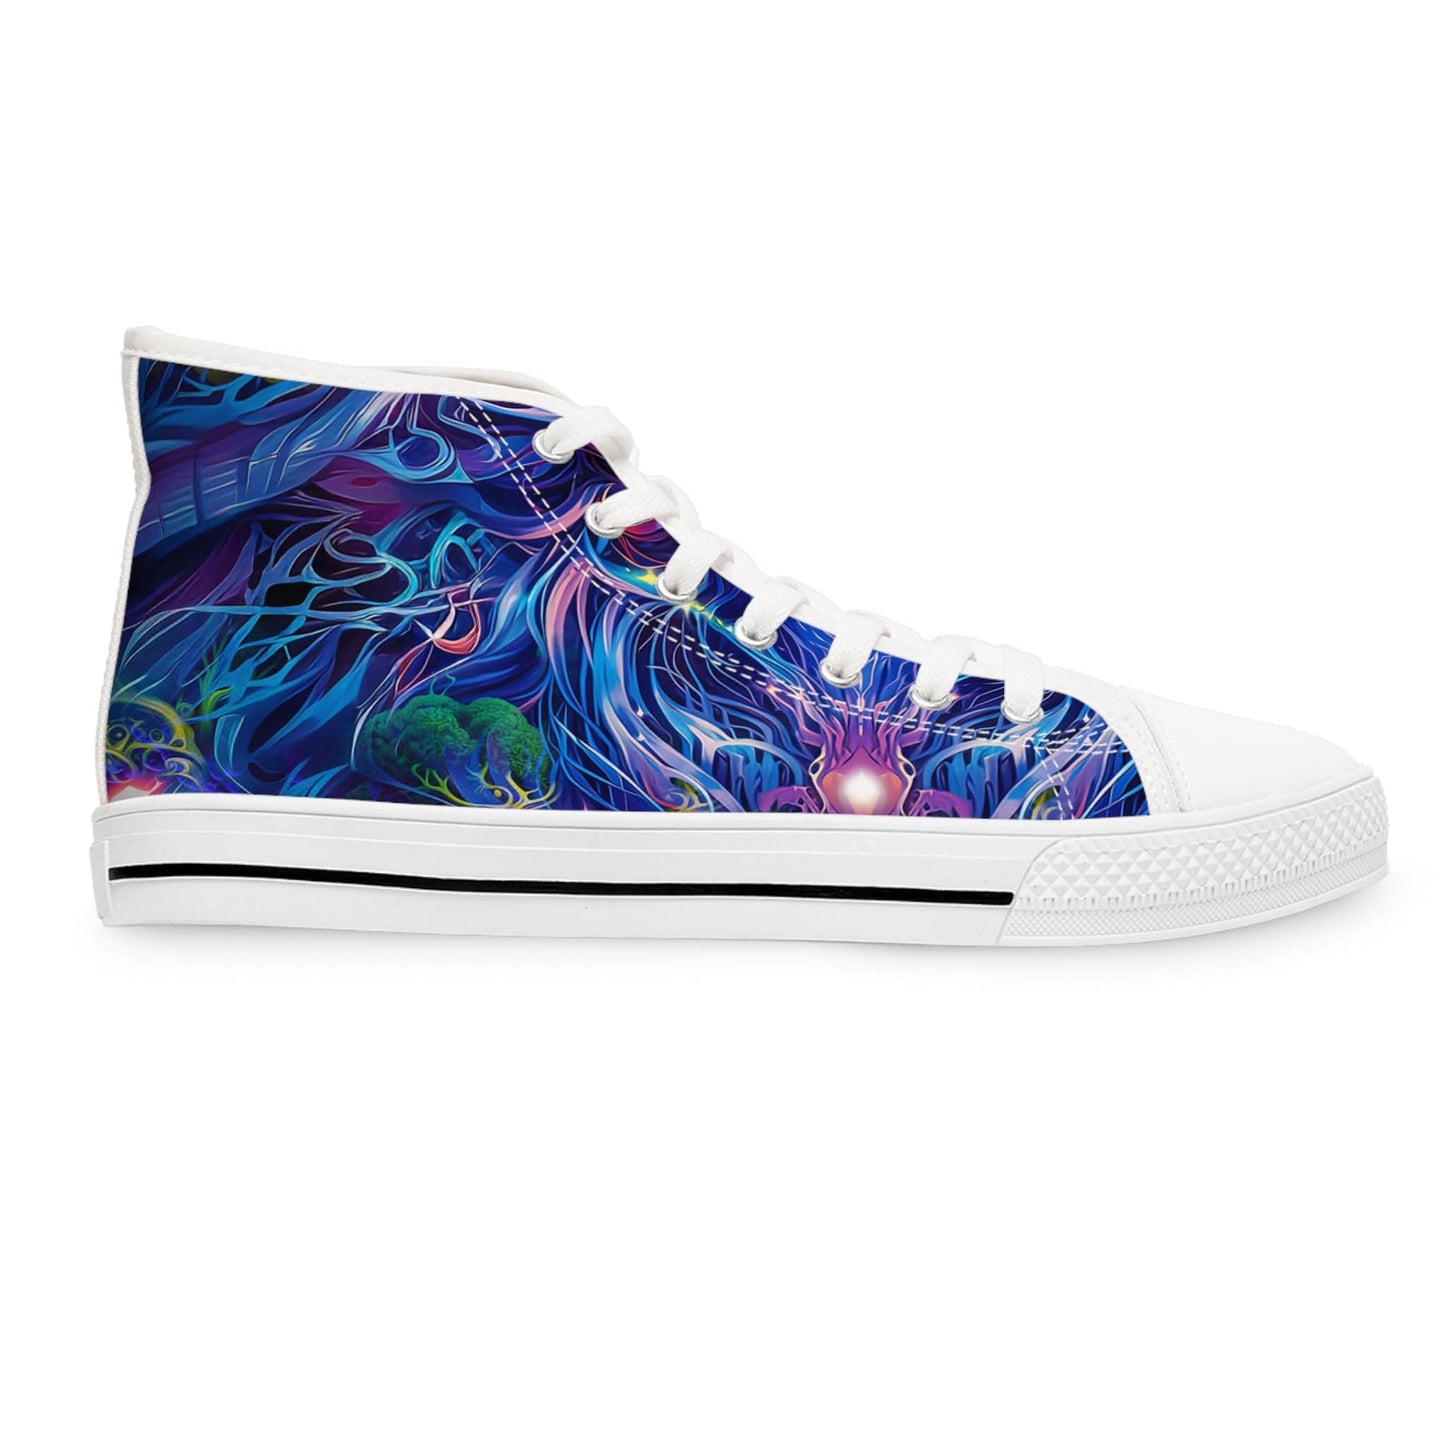 "The Sacred Vine" WOMEN'S HIGHT TOP SNEAKERS